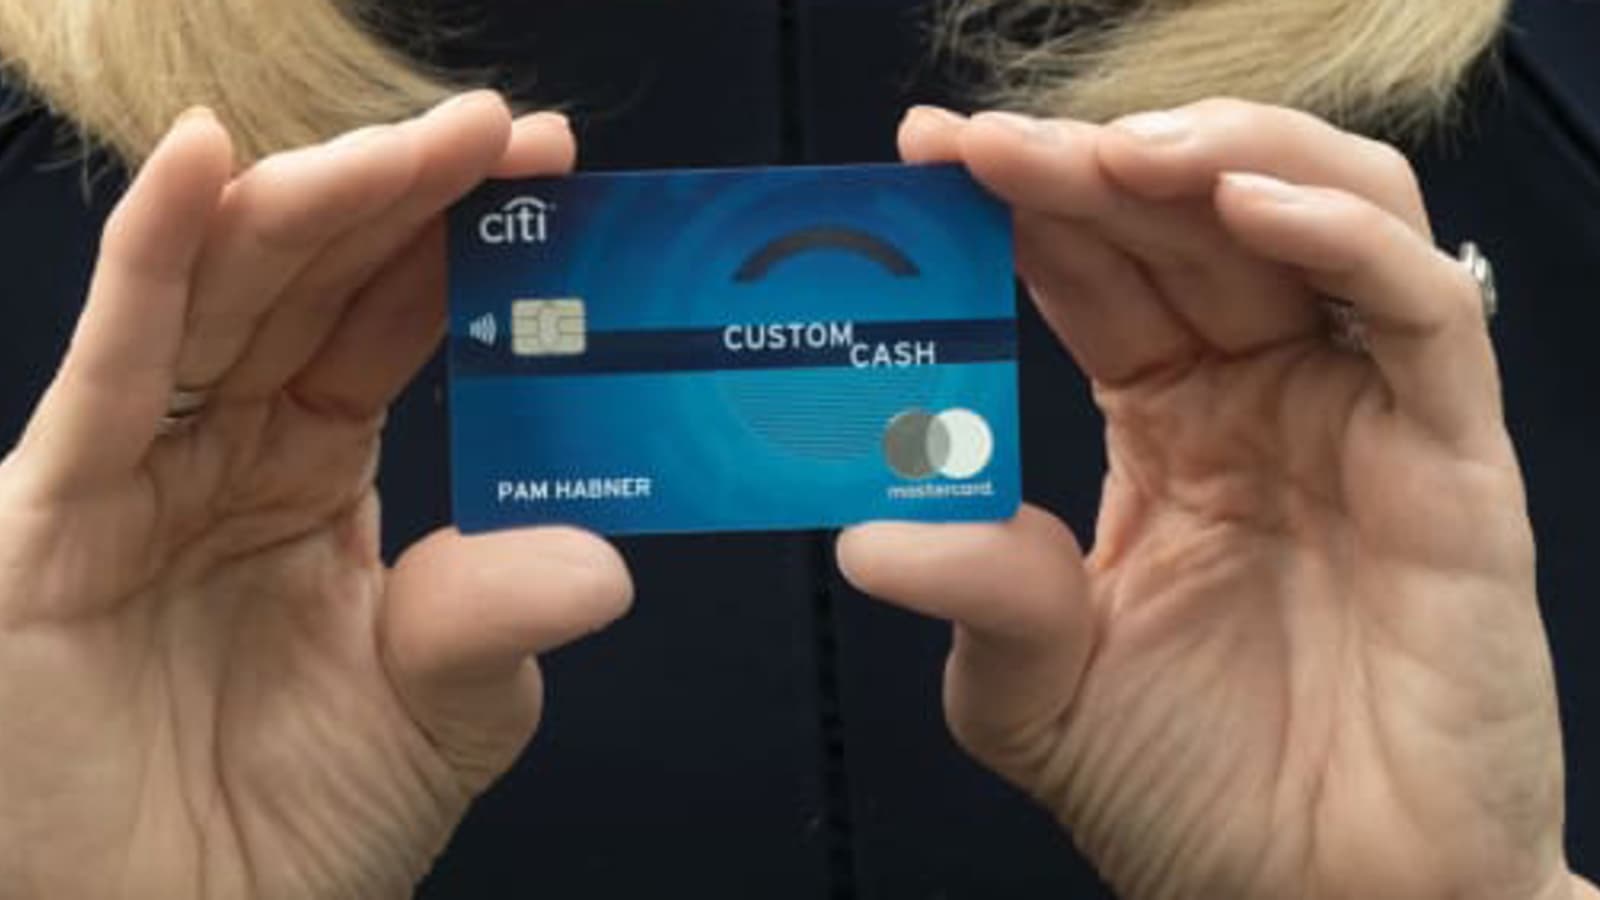 Citibank Business Card : Citibank Leaves Indonesia An Opportunity For Other Banks To Seize The Credit Card Market Netral News / † dagger subject to credit approval.